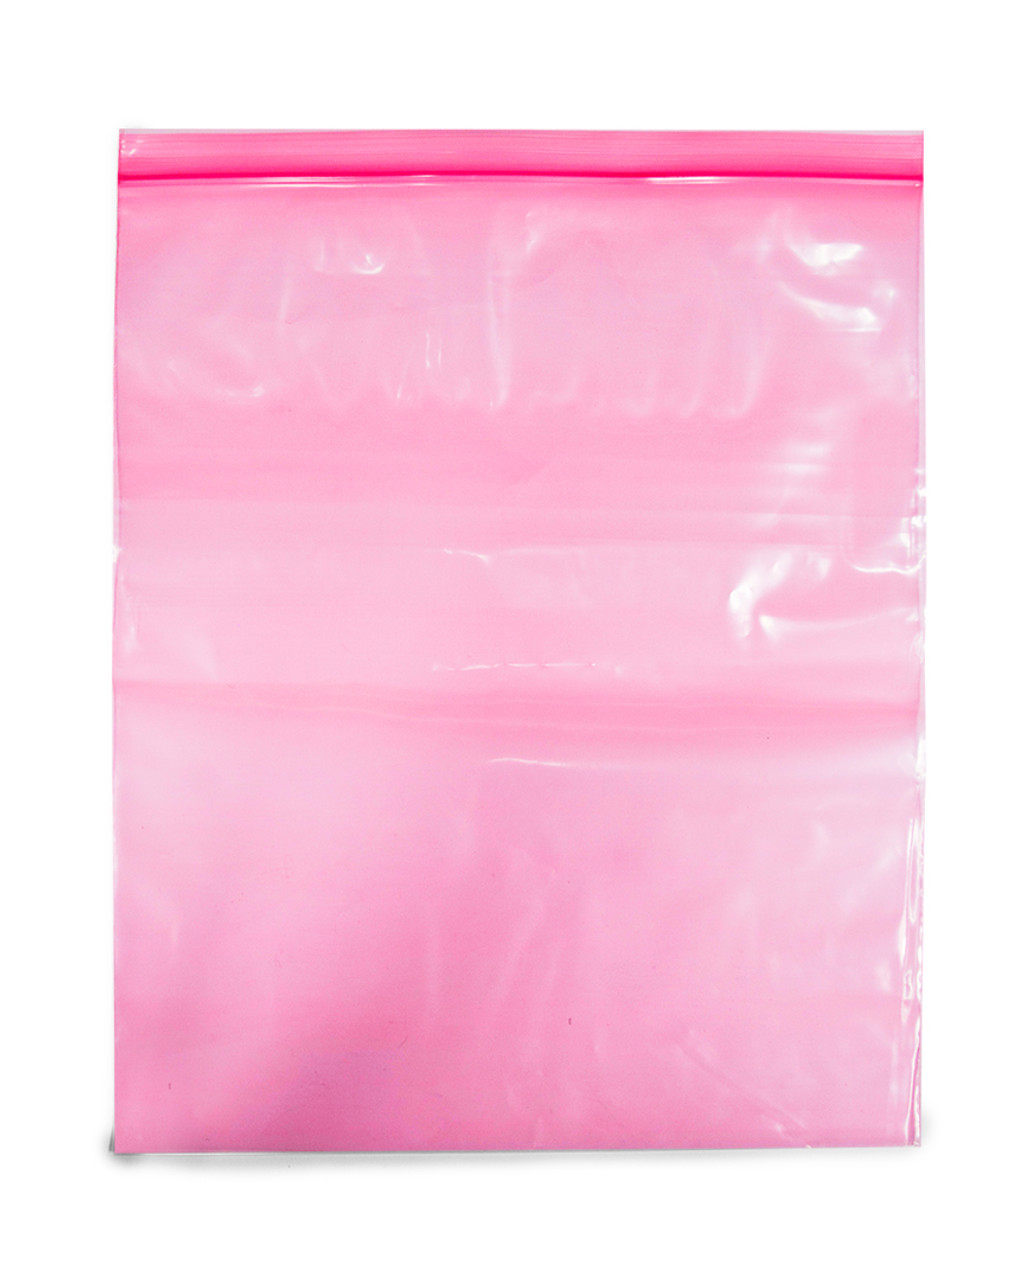 12x12 4 Mil Pink Anti-Static Reclosable Bags - 1,000 Bags/Case